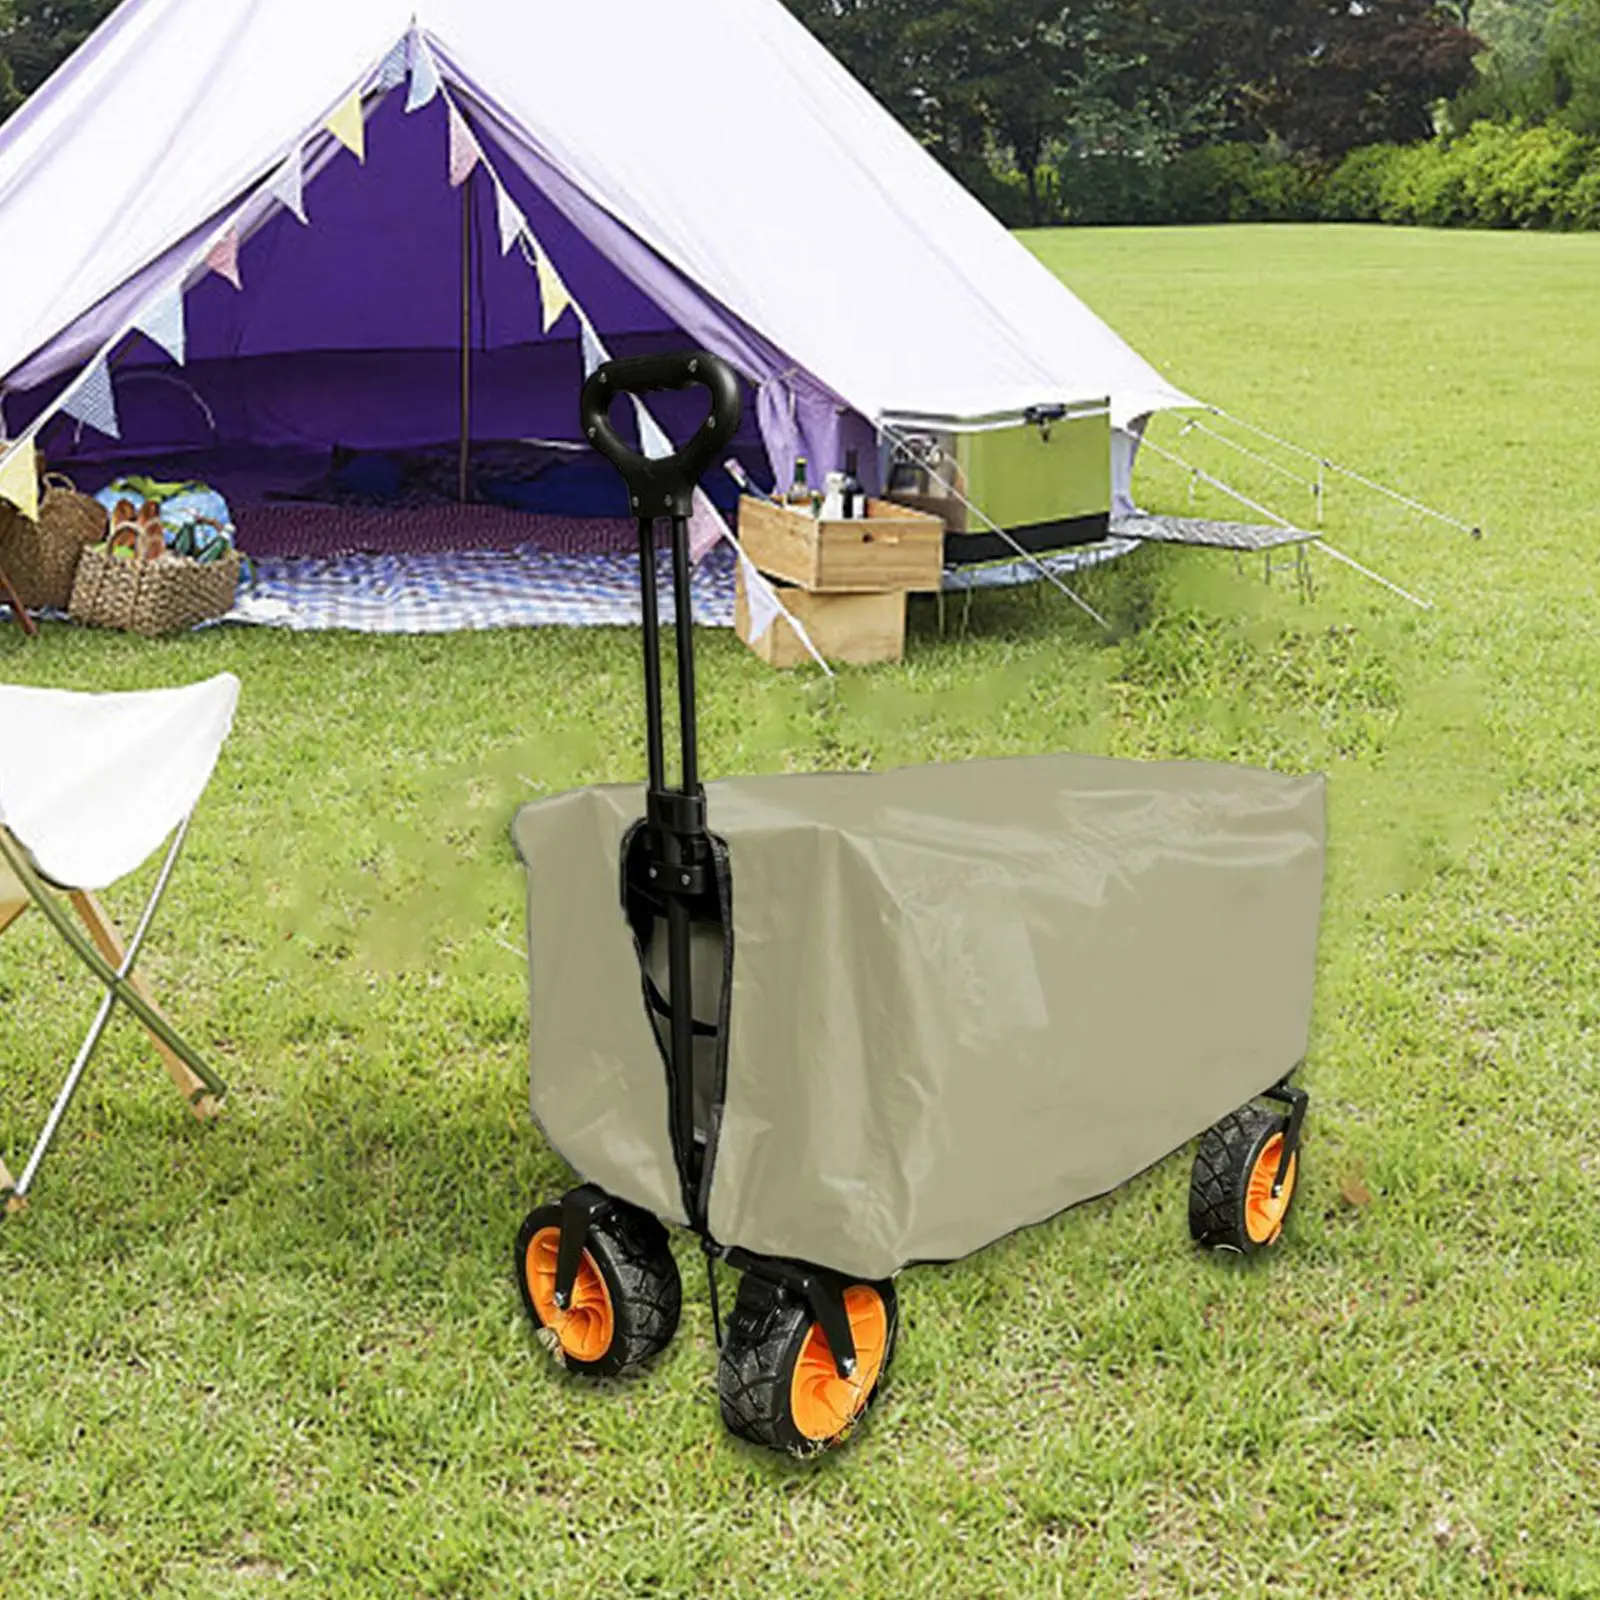 Outdoor Folding Wagon Cover Protective Cover 35x20x18inch Sturdy with Storage Bag Oxford Fabric for Collapsible Wagon Carts